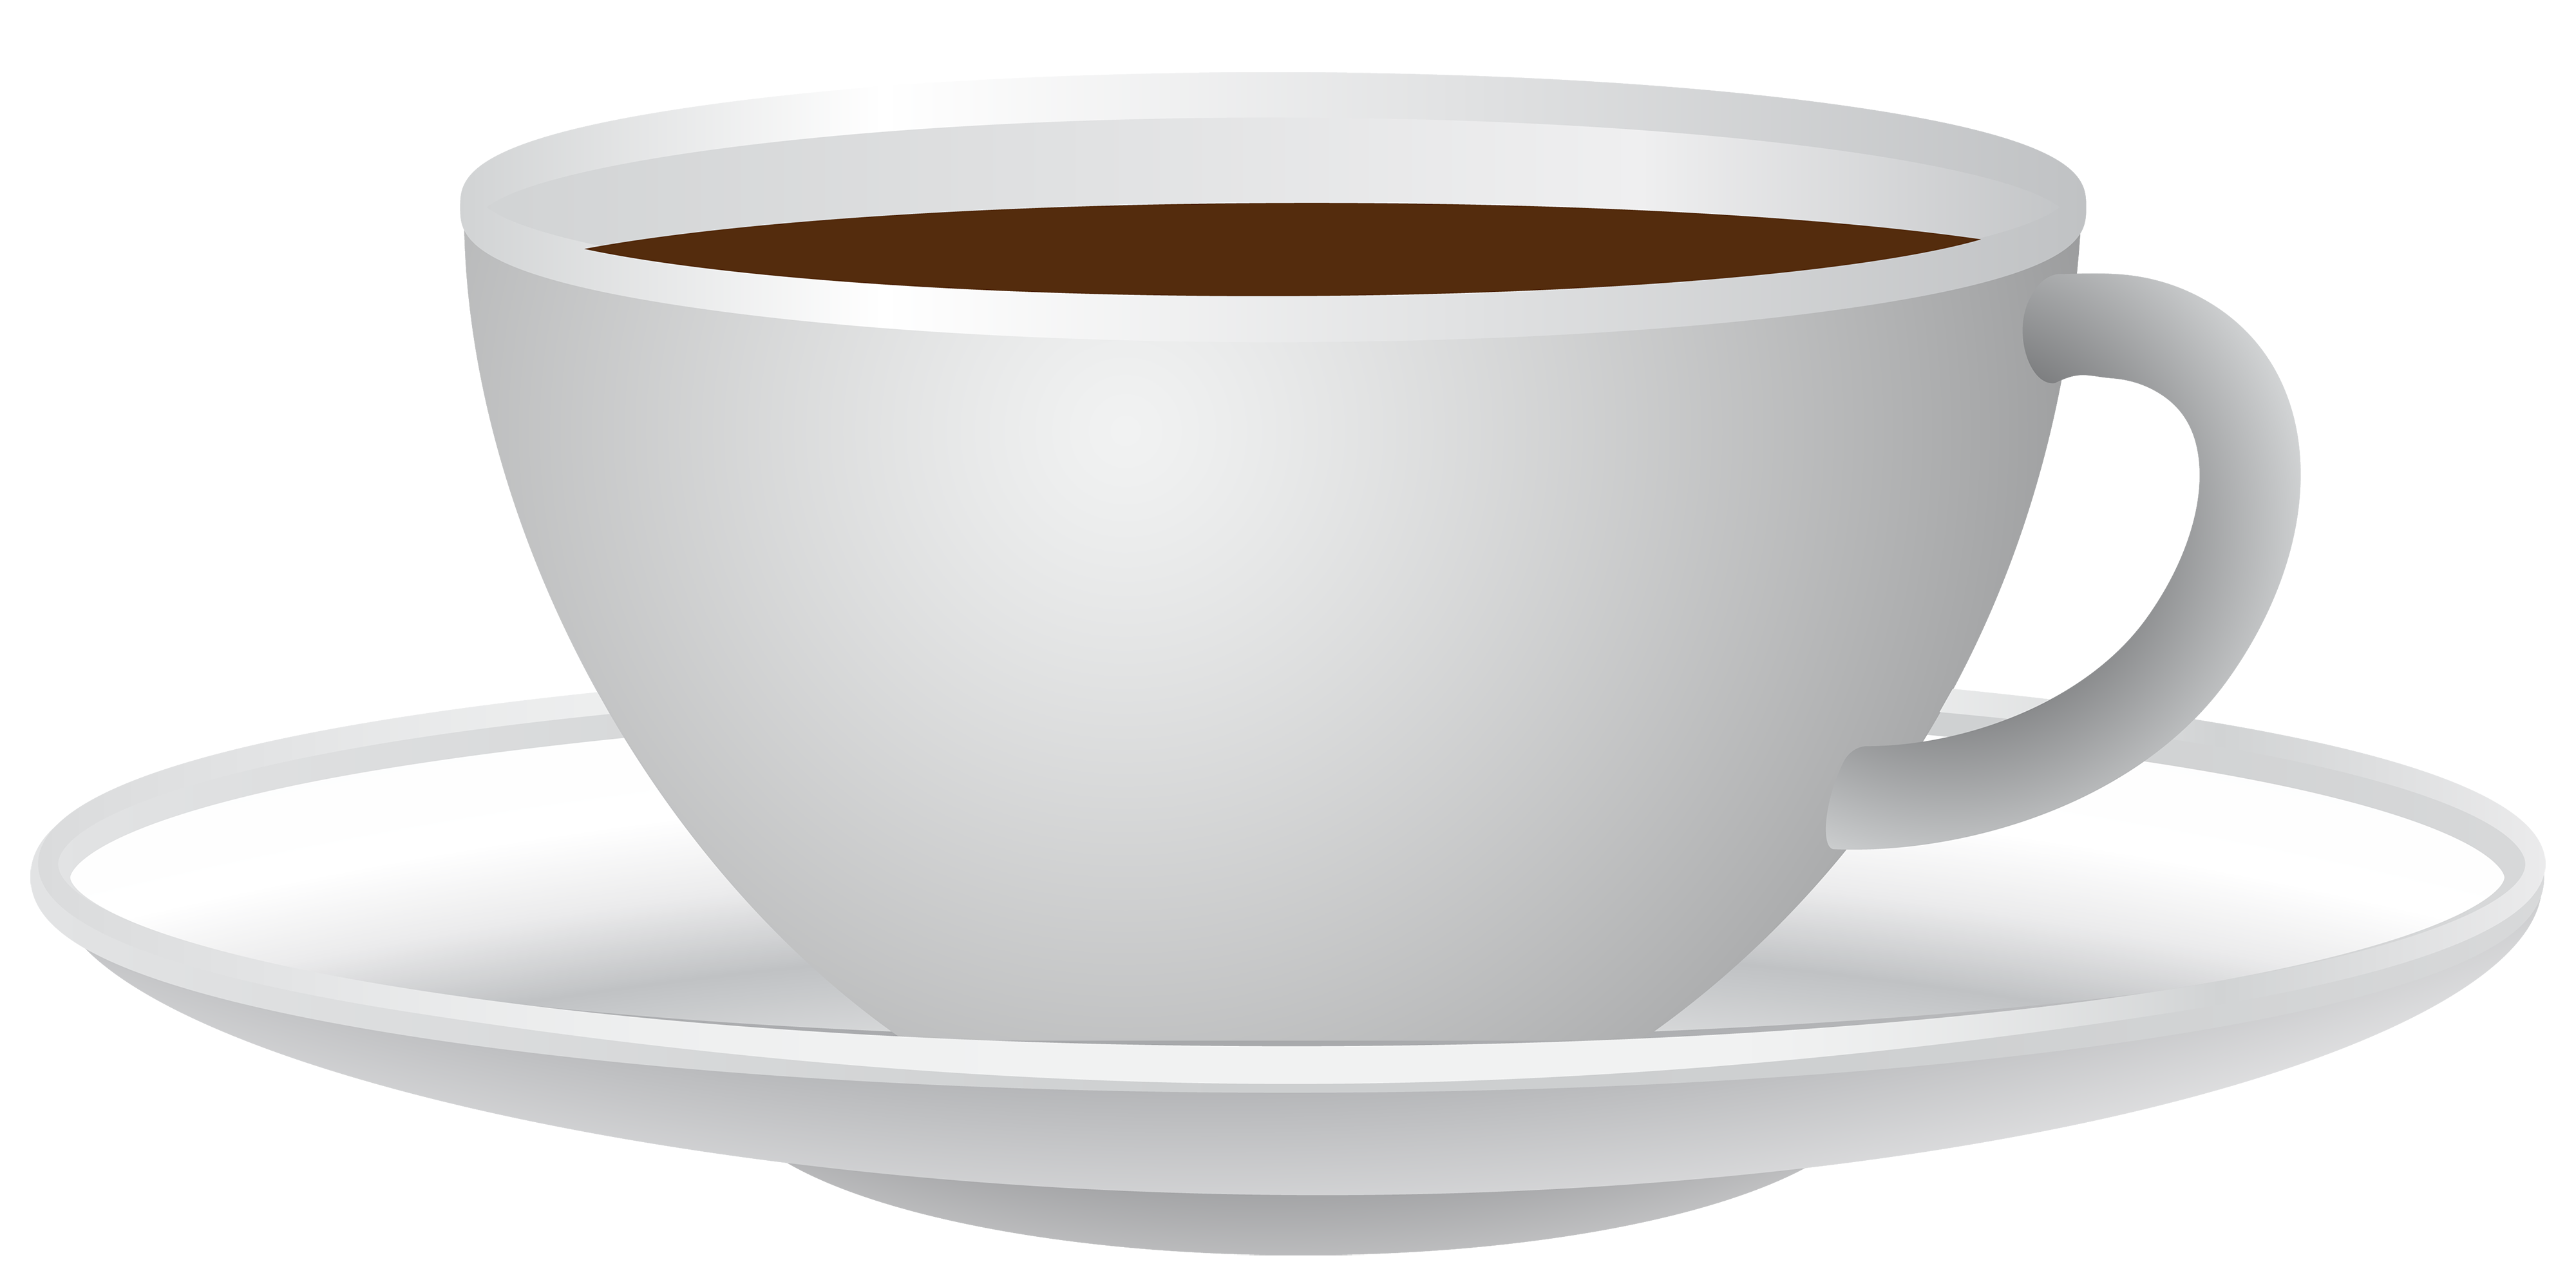 coffee clipart